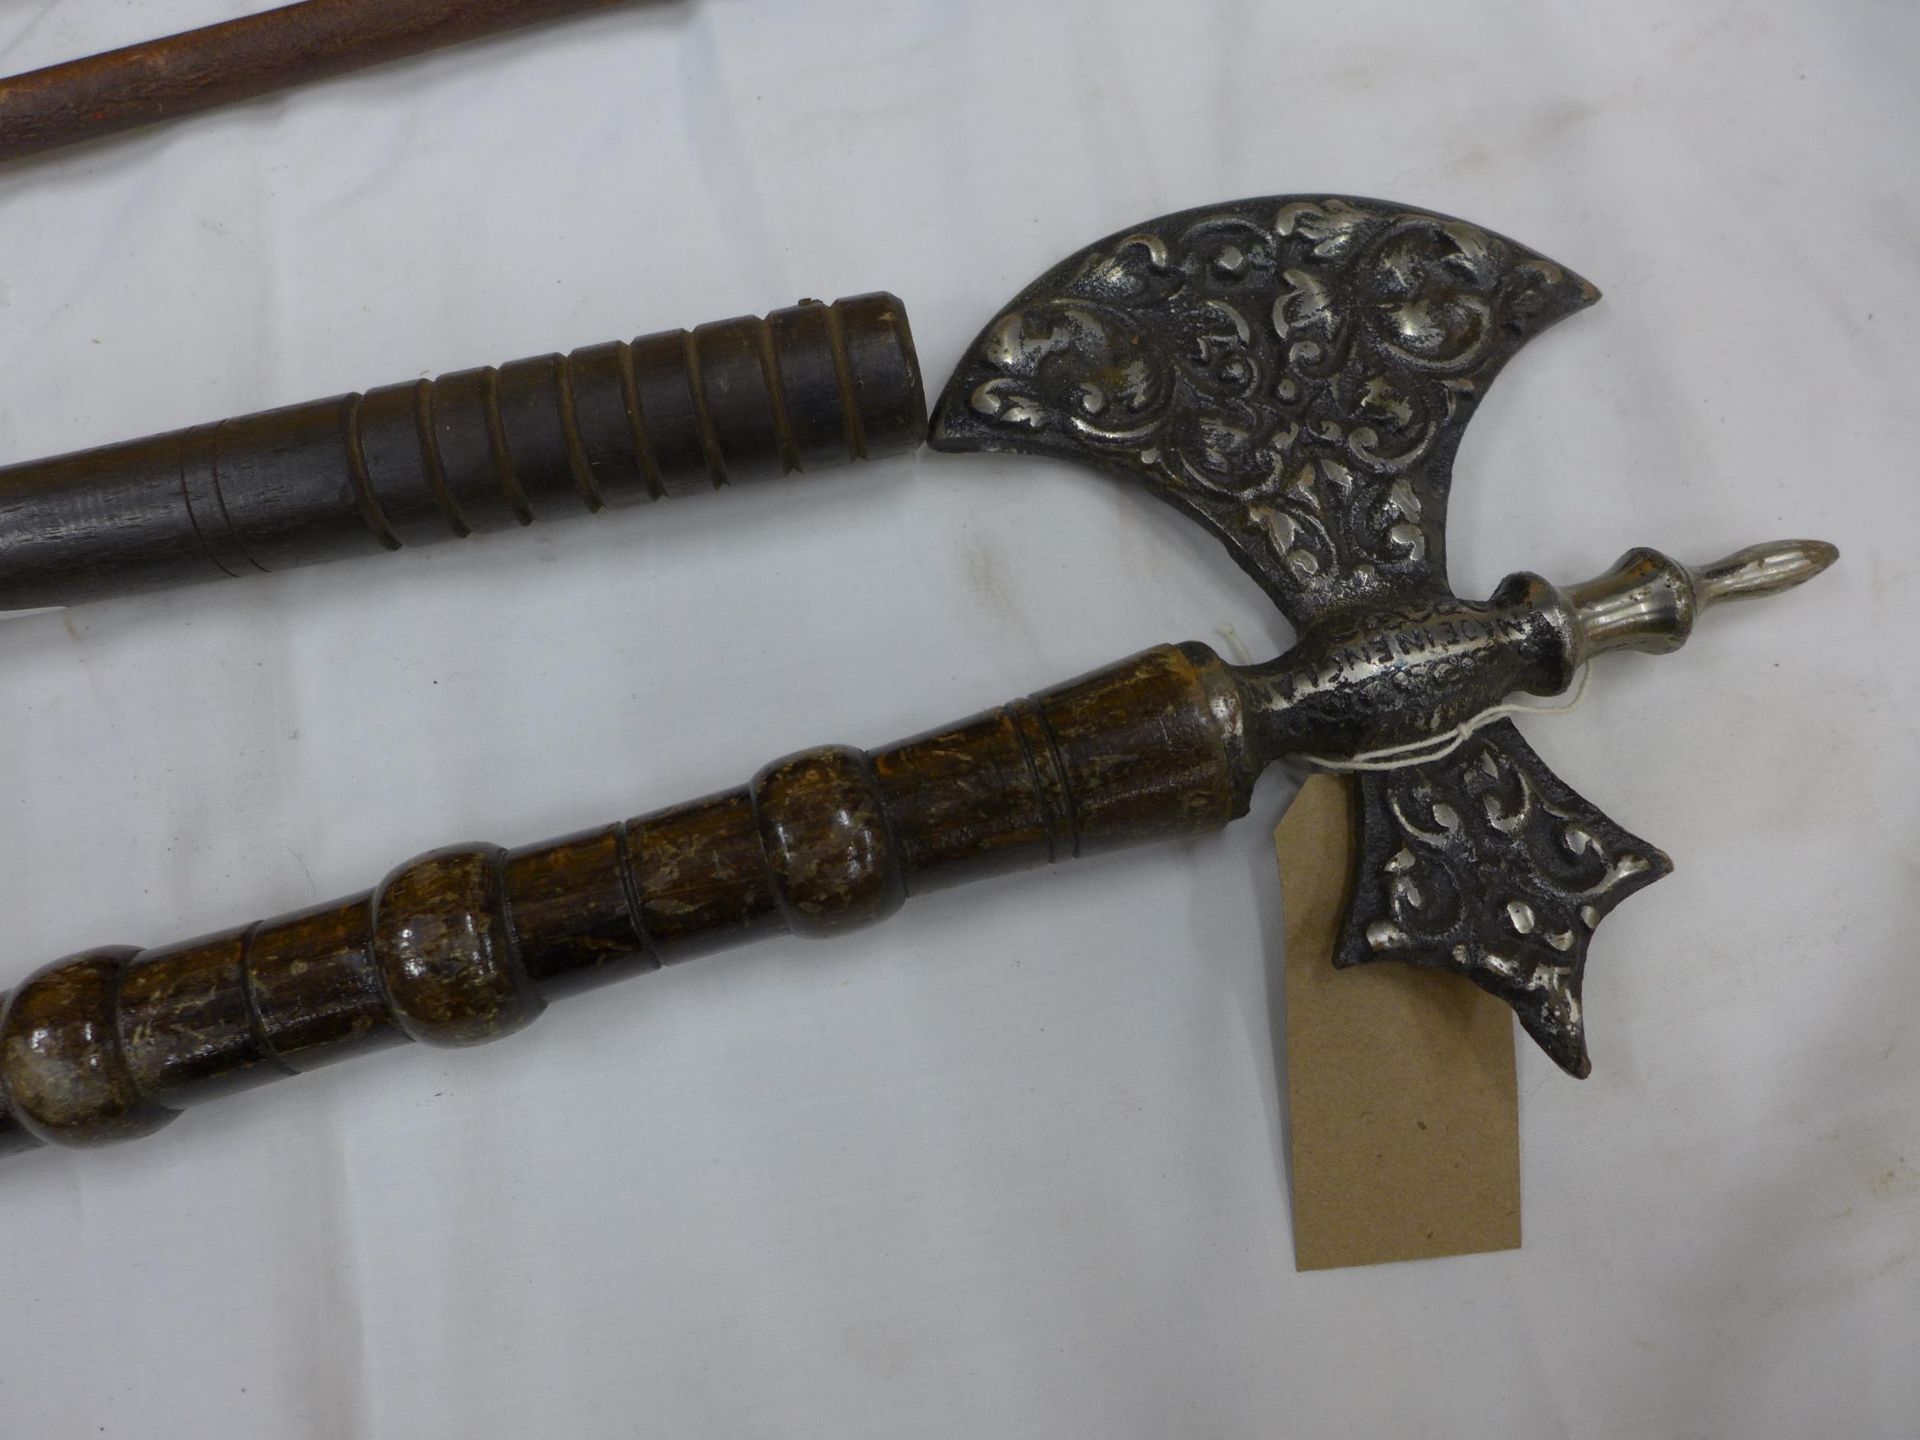 FOUR REPRODUCTION MEDIEVAL AXES - Image 2 of 3